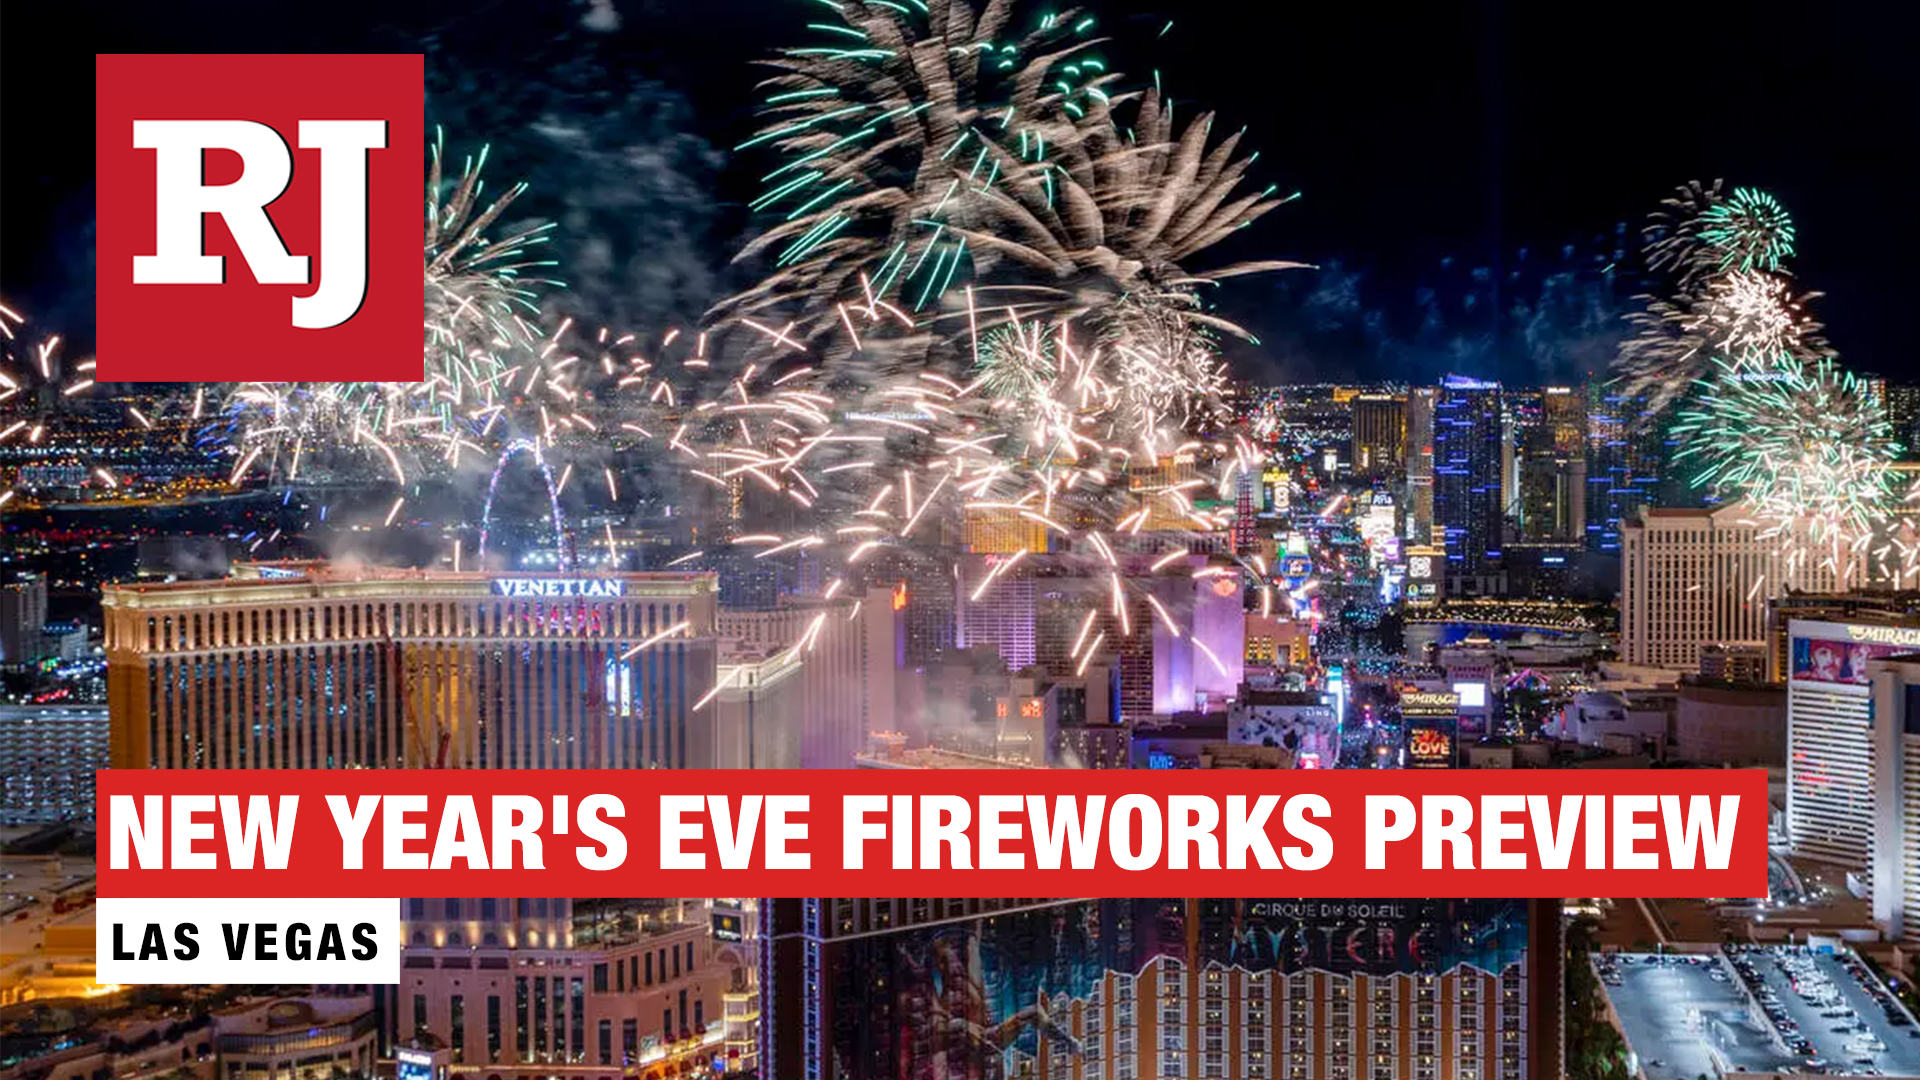 New Year's Eve Fireworks Preview